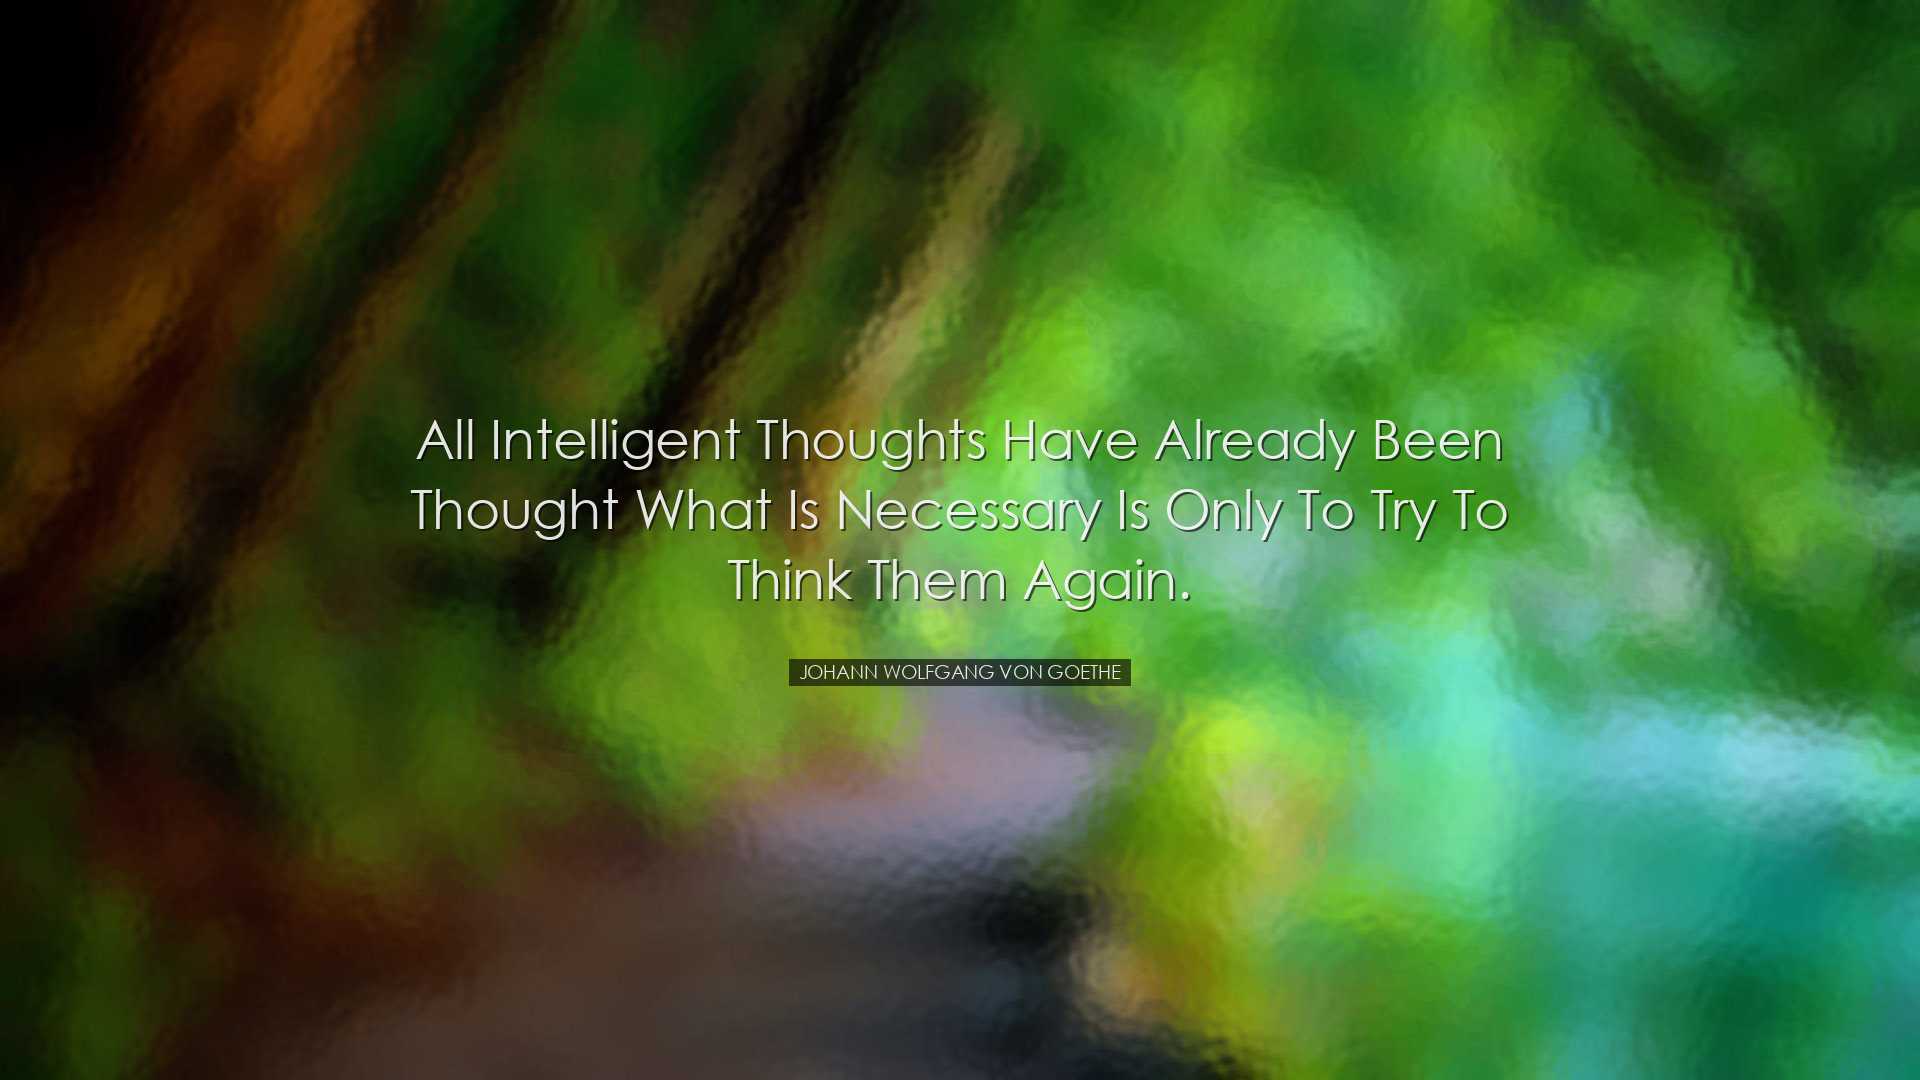 All intelligent thoughts have already been thought what is necessa